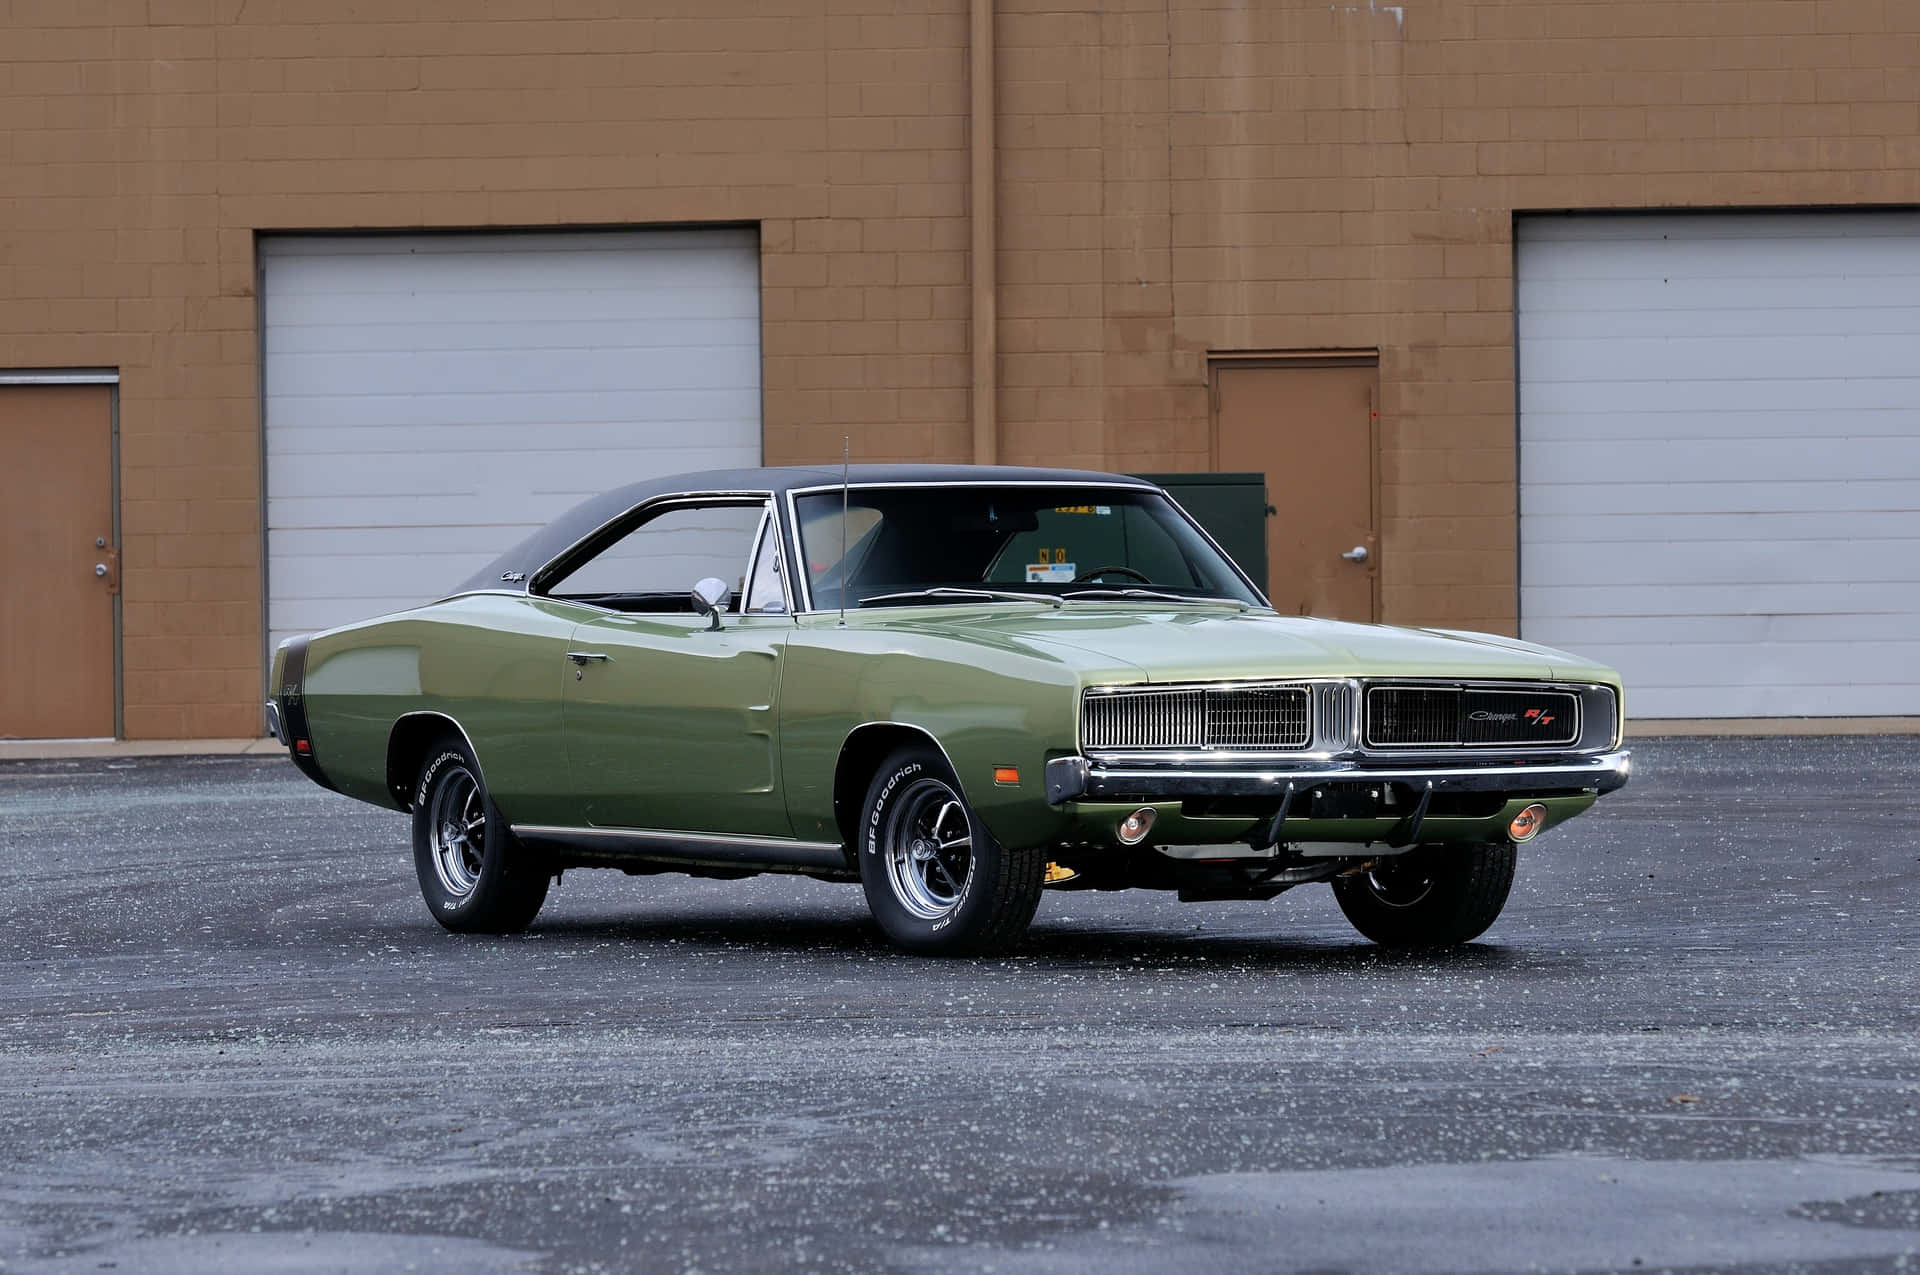 The Legendary Muscle Car: 1969 Dodge Charger